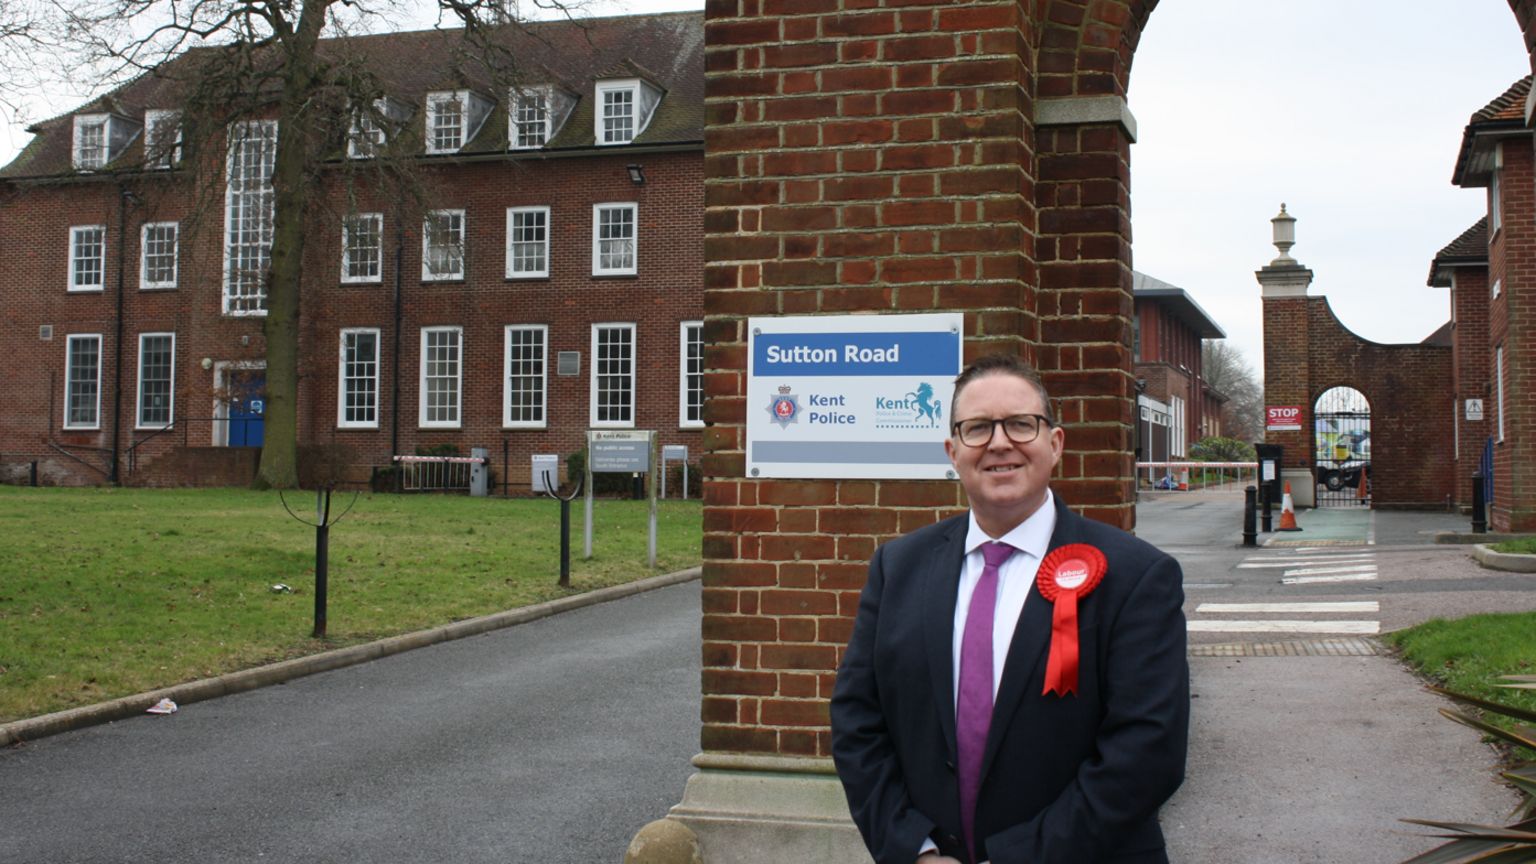 Lenny Rolles, the Labour candidate for Kent PCC